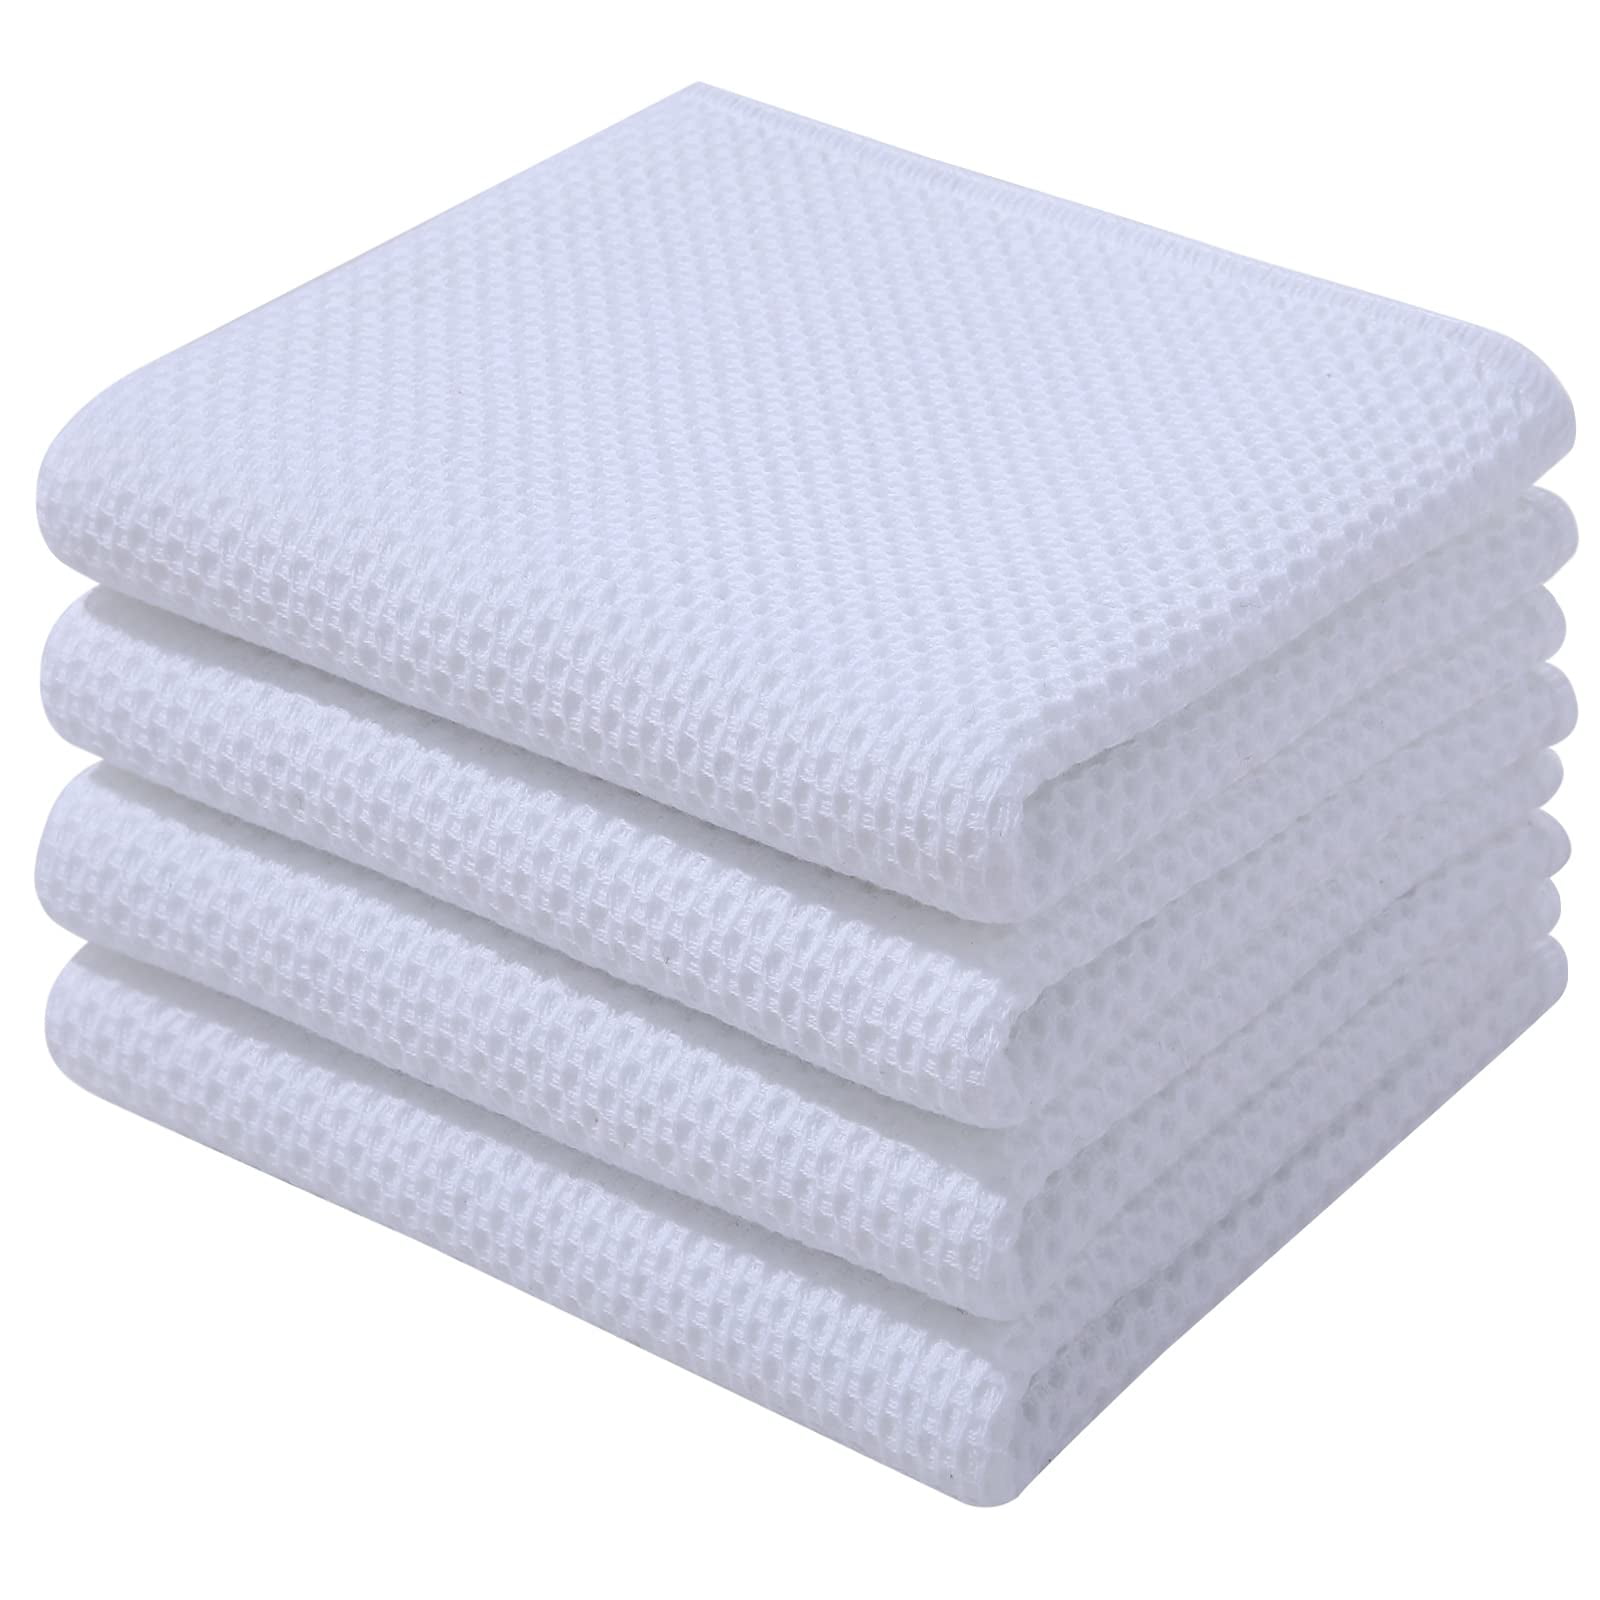 smiry 100% Cotton Waffle Weave Kitchen Dish Towels, Ultra Soft Absorbent Quick Drying Cleaning Towel, 13x28 Inches, 4-Pack, Light Grey, Size: Kitchen